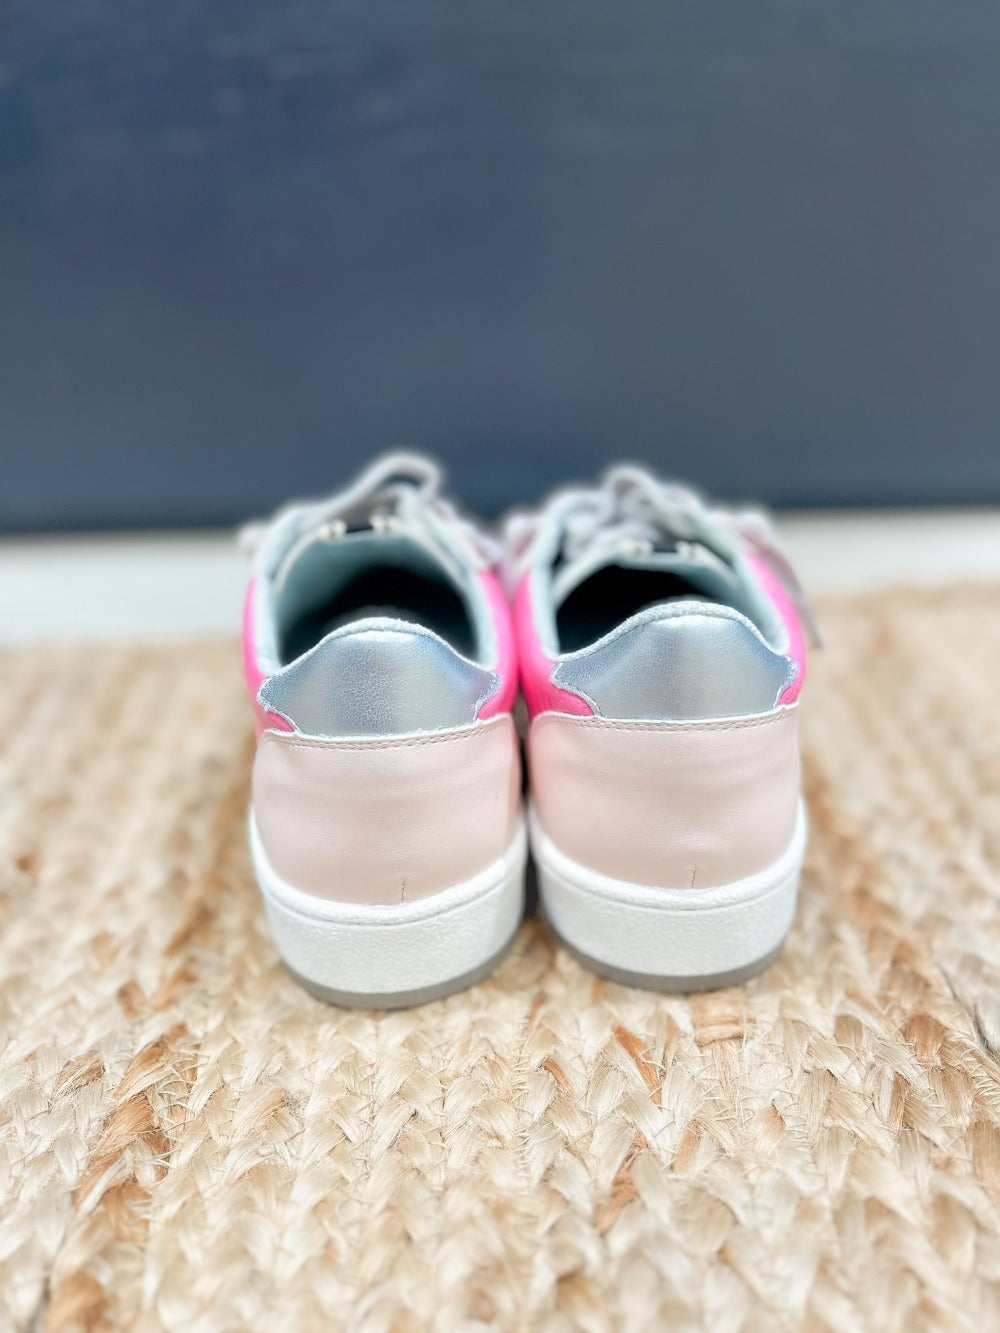 Sneakers with Hot Pink sides and light pink star